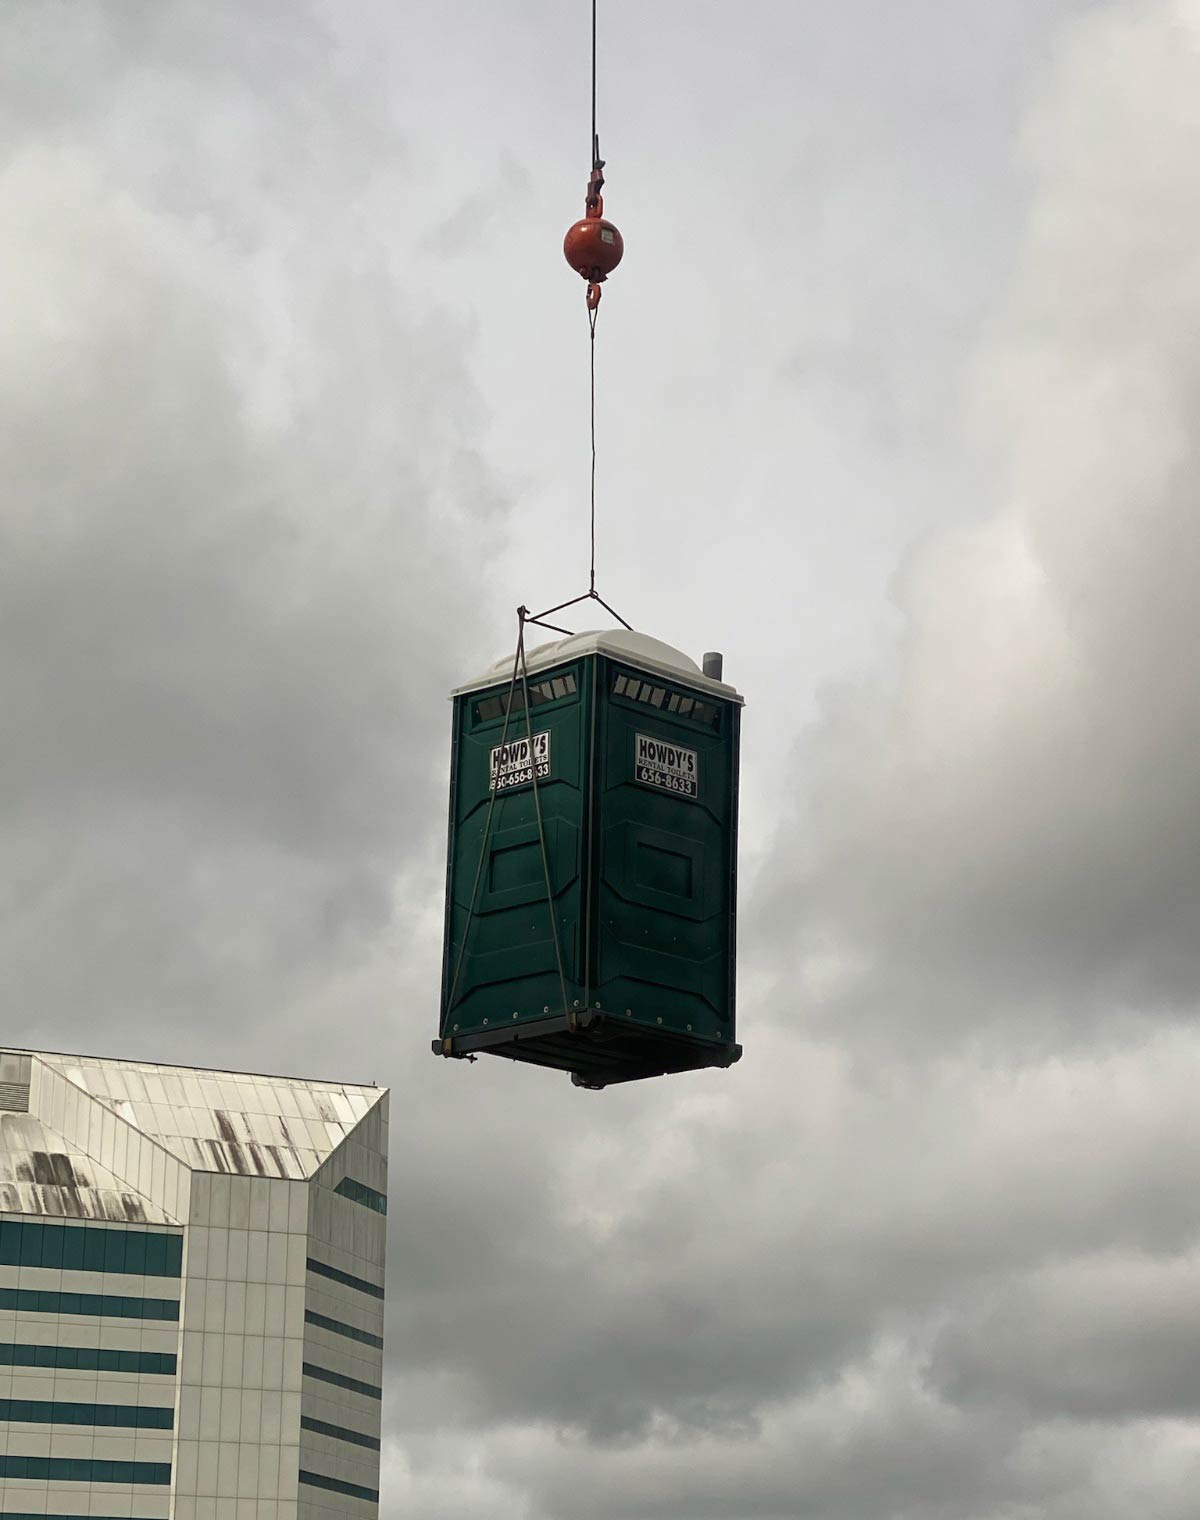 Doctor Poo in his Turdis, seen outside my office window this morning